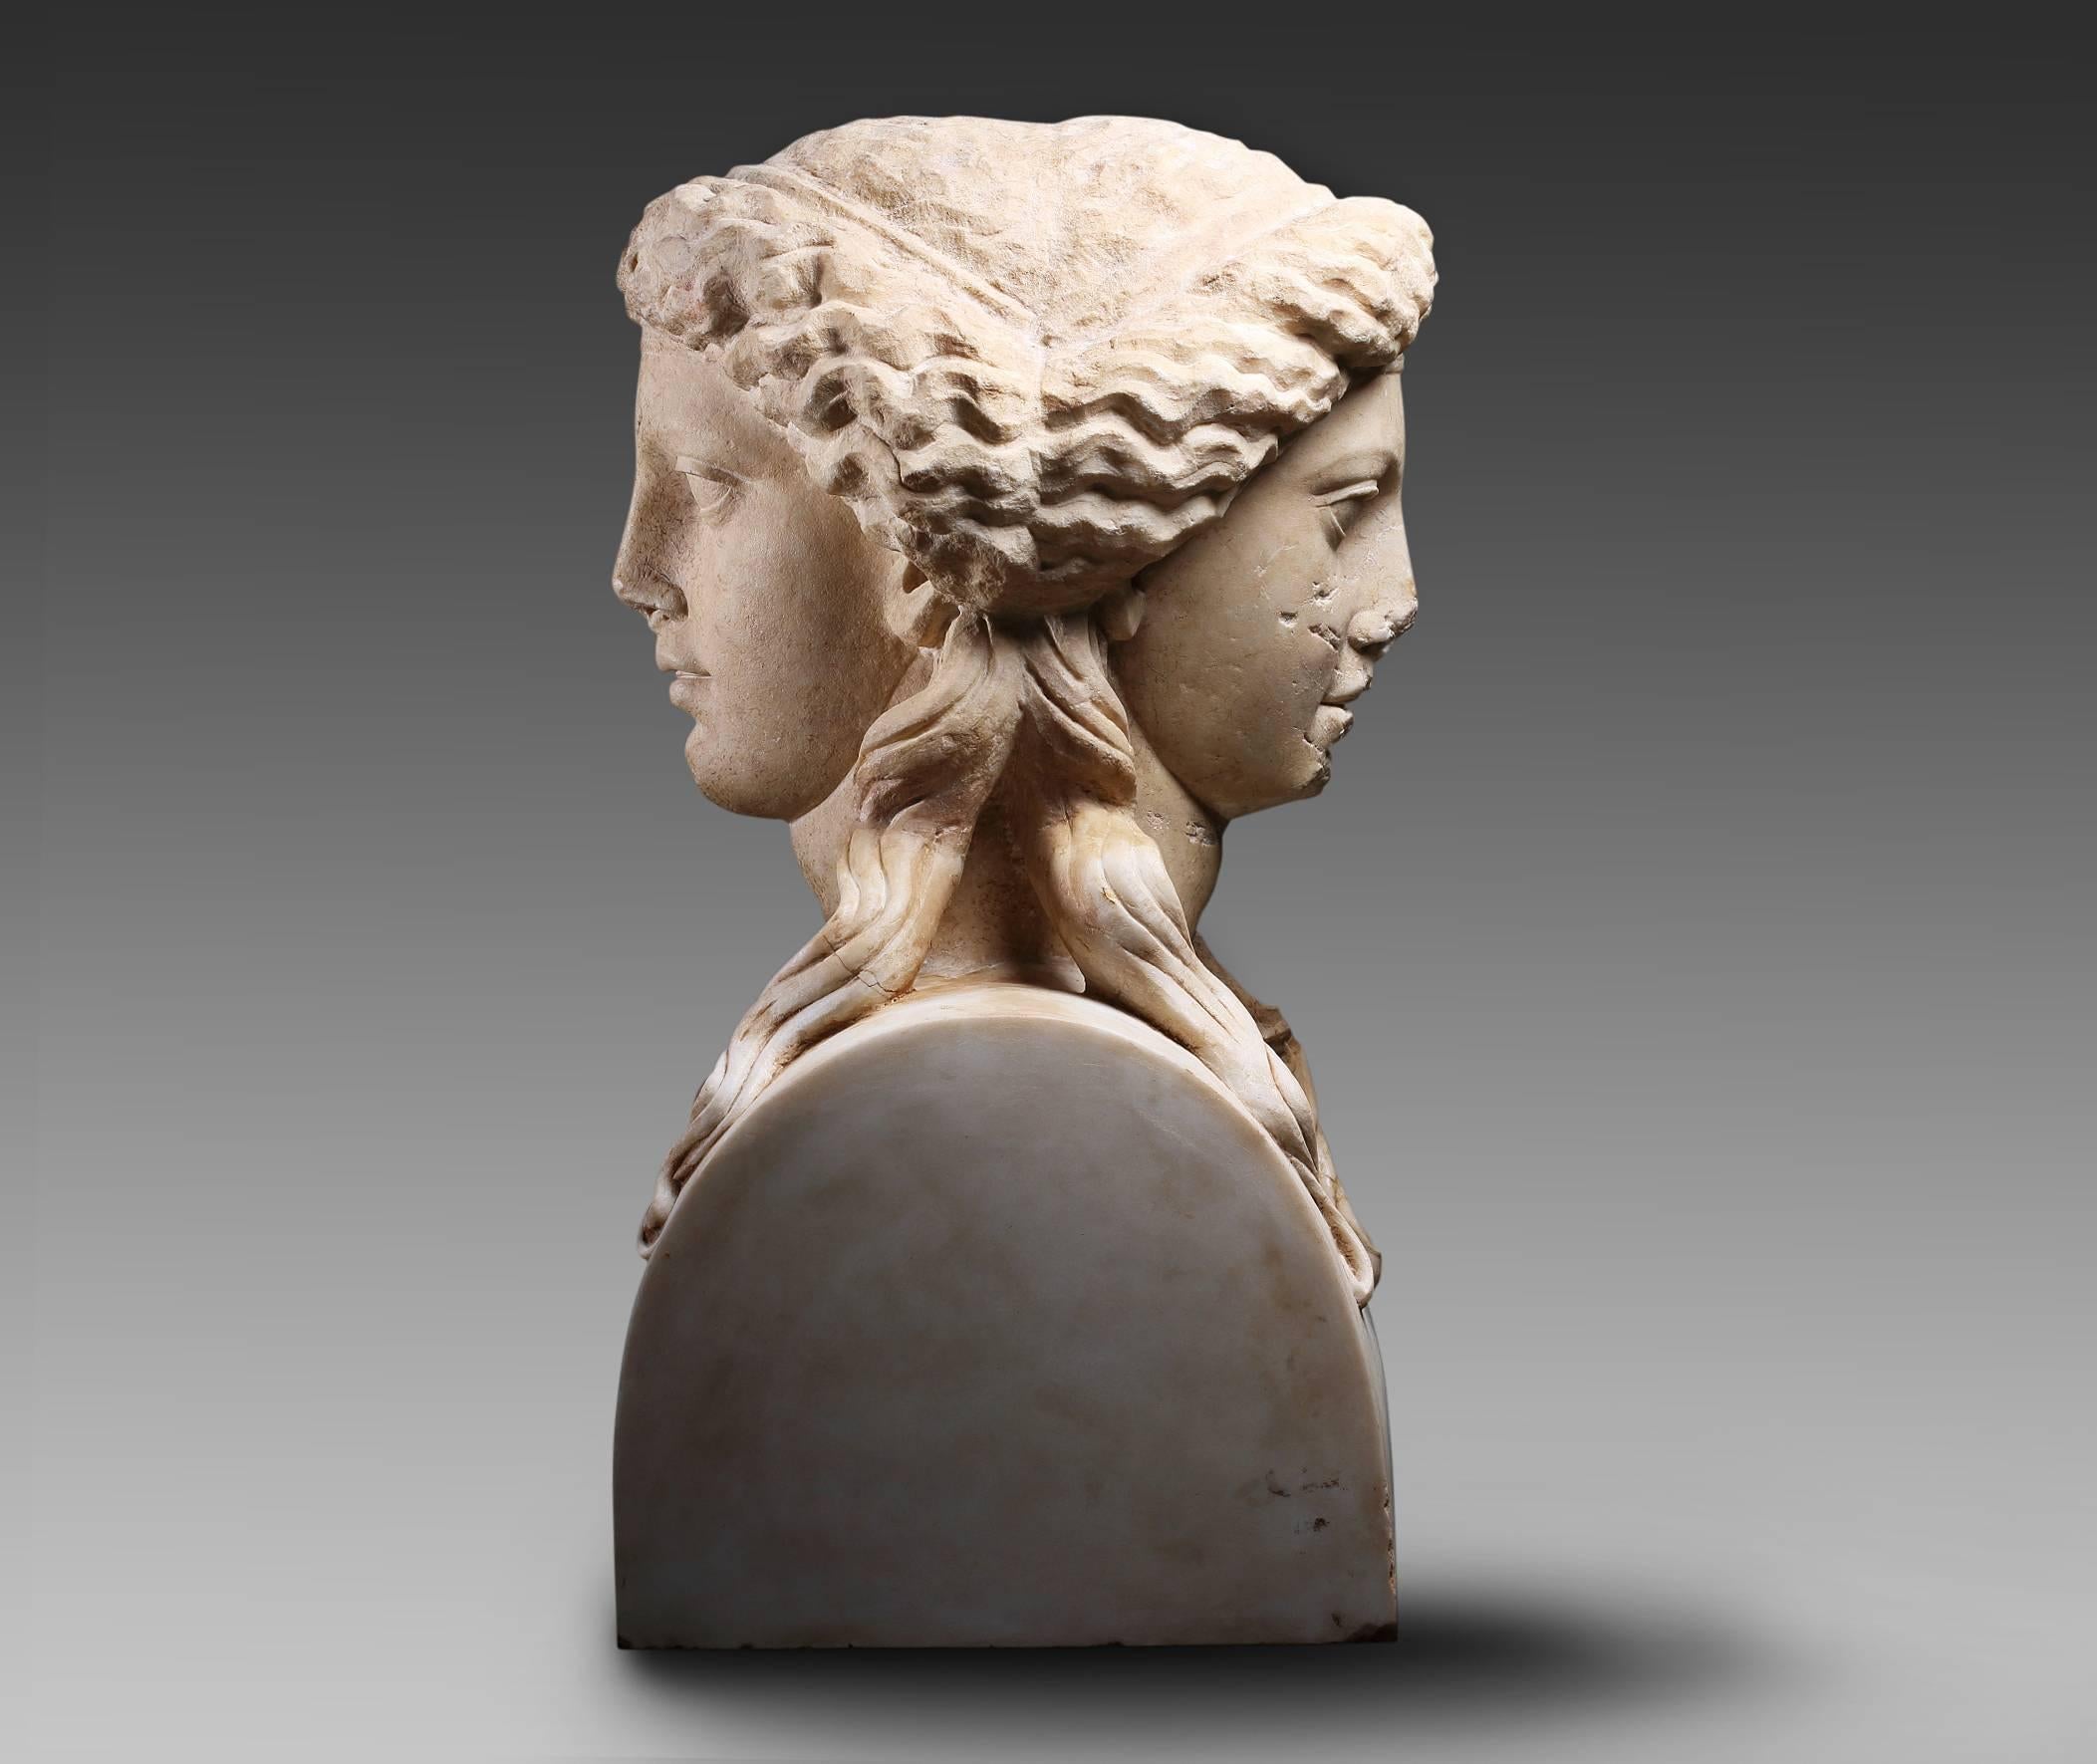 18th Century and Earlier Roman Marble Janiform Herm Representing Dionysus-Bacchus, 2nd Century AD For Sale